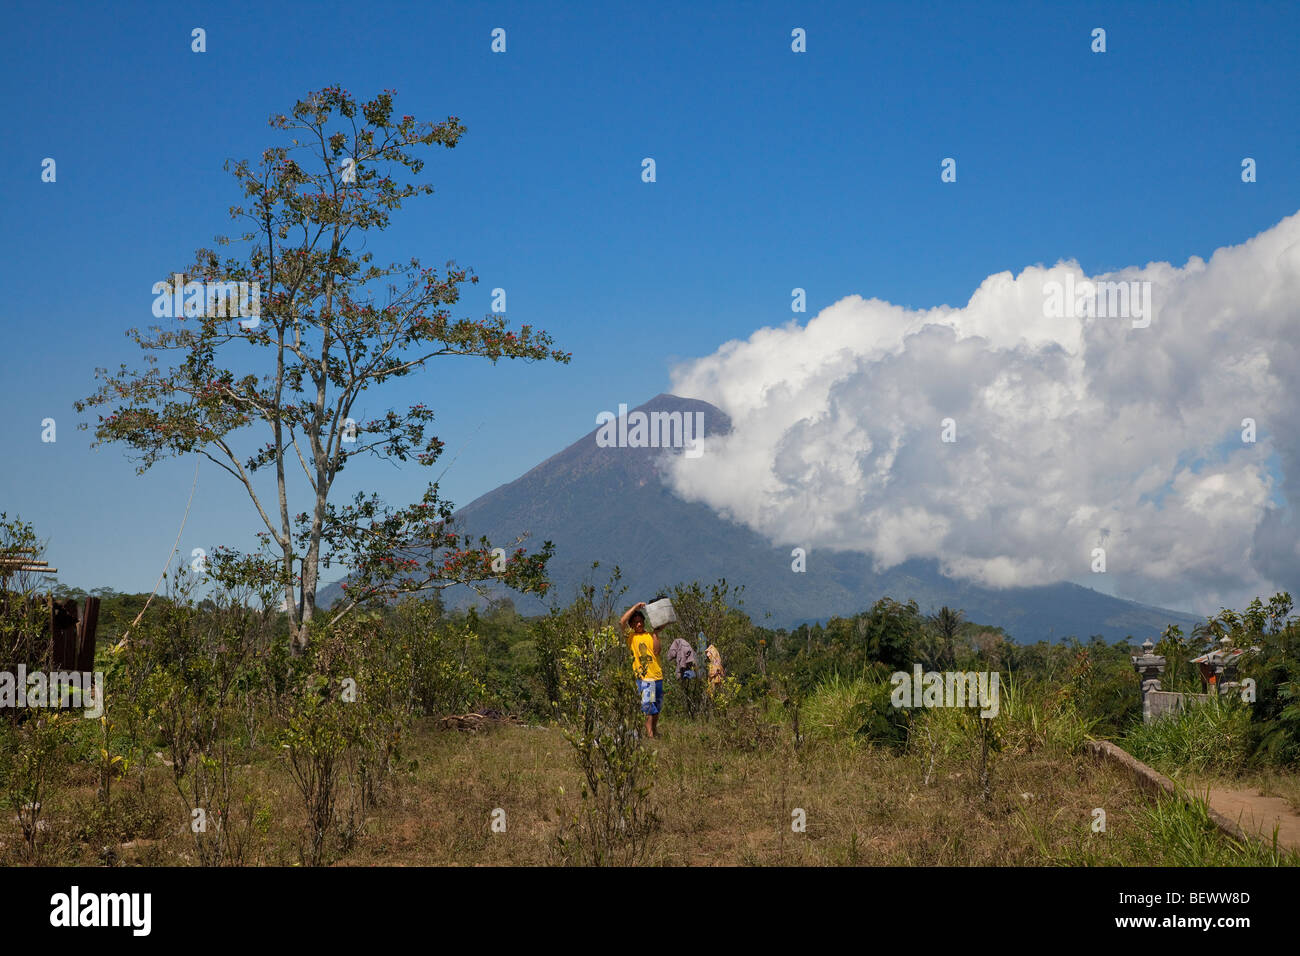 Mount Agung or Gunung Agung viewed from the South West, Bali, Indonesia. Stock Photo